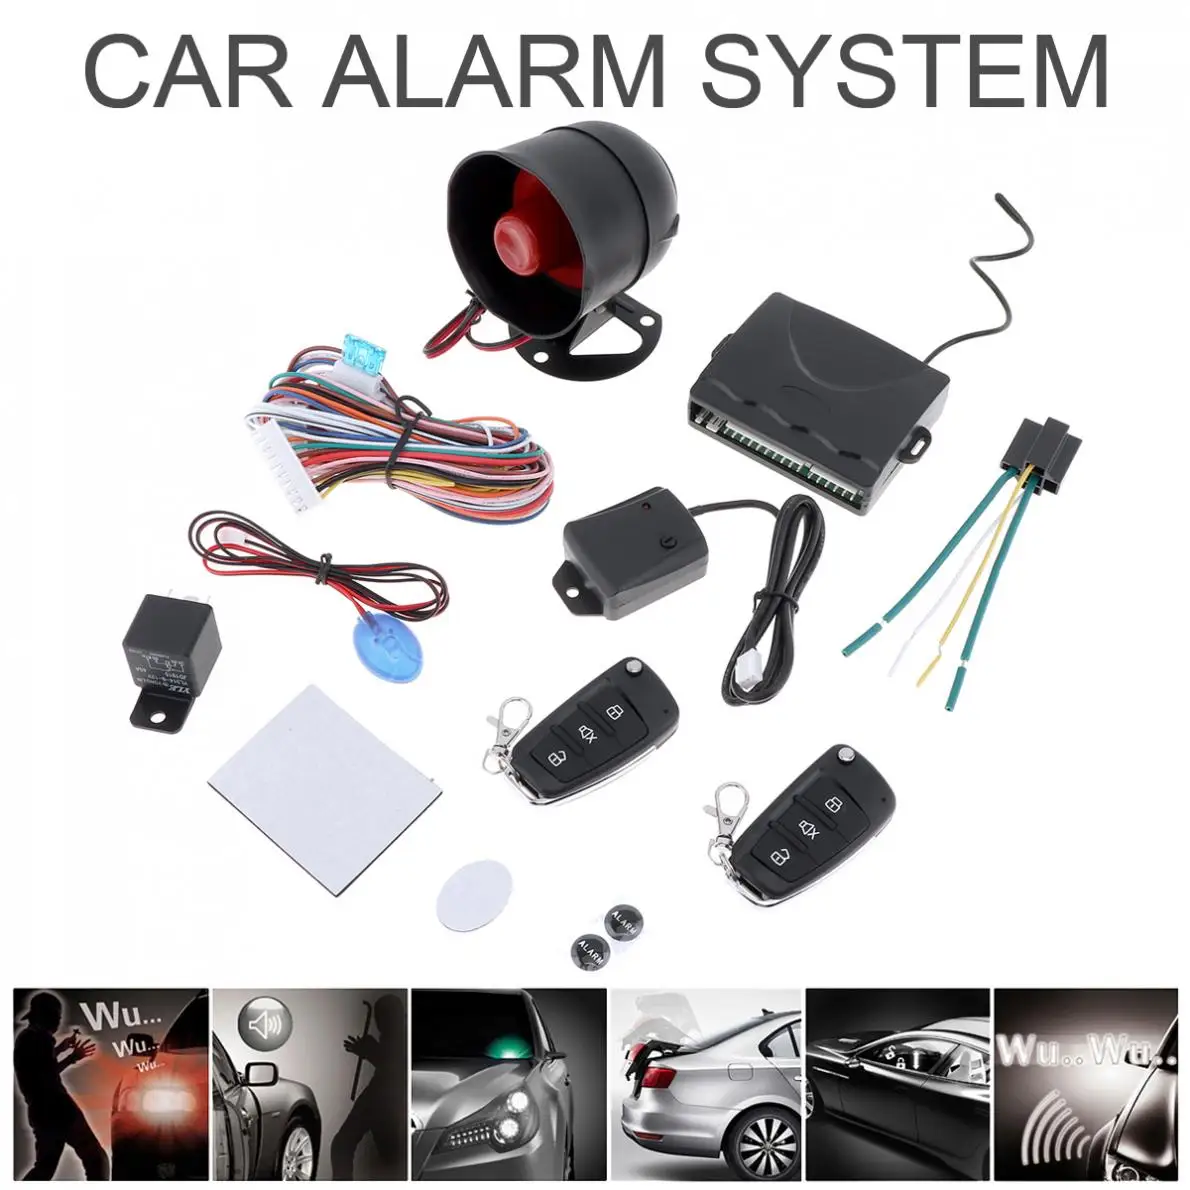 

Universal 12V Auto Car Alarm Security System Keyless Entry Central Door Locking System with Remote Control Siren Sensor